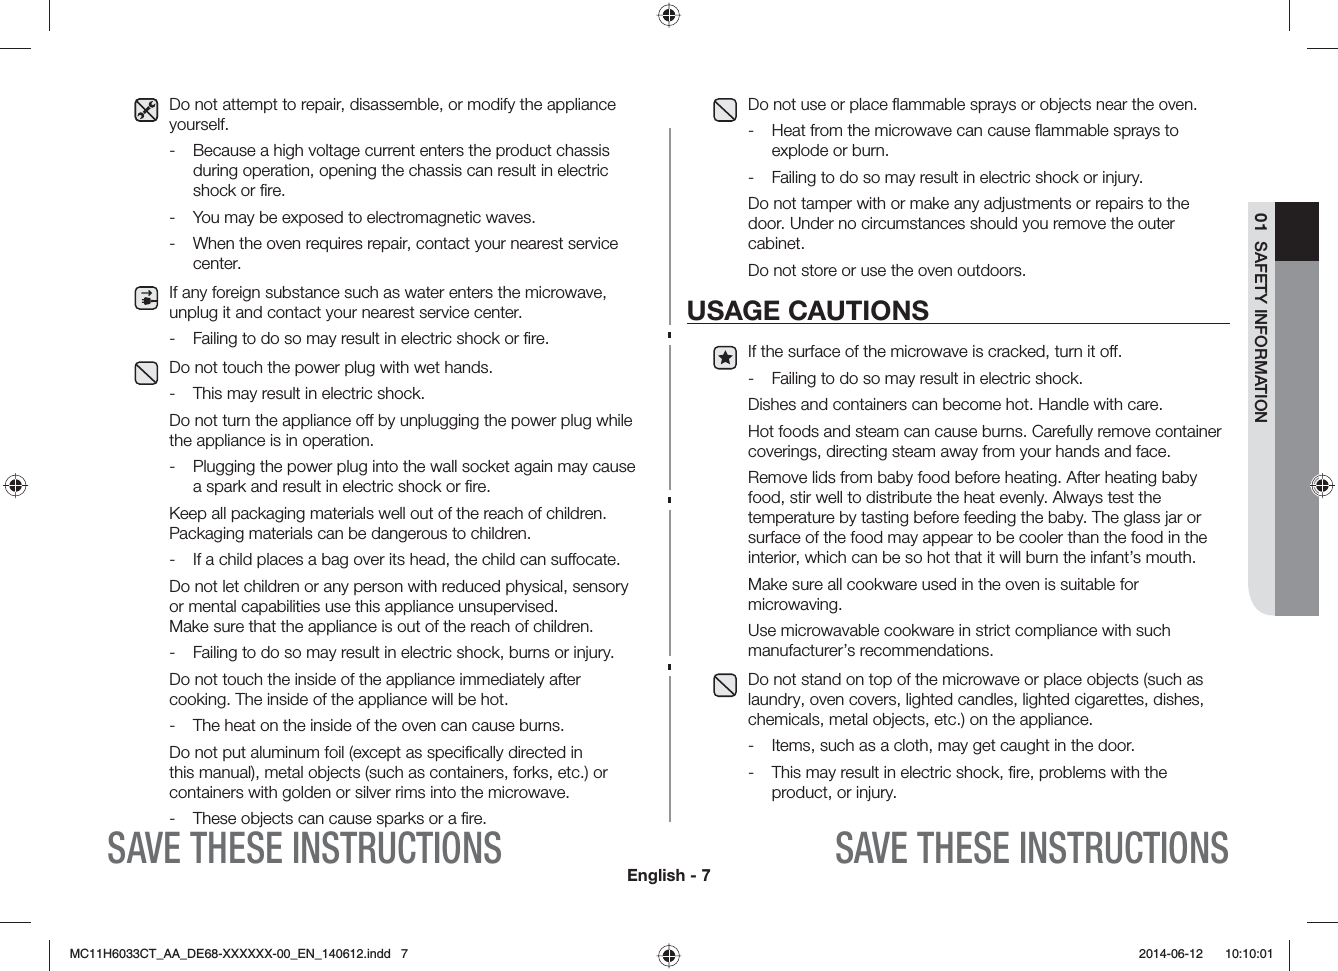 English - 701  SAFETY INFORMATIONSAVE THESE INSTRUCTIONSSAVE THESE INSTRUCTIONSDo not attempt to repair, disassemble, or modify the appliance yourself.-  Because a high voltage current enters the product chassis during operation, opening the chassis can result in electric shock or ﬁre.-  You may be exposed to electromagnetic waves.-  When the oven requires repair, contact your nearest service center.If any foreign substance such as water enters the microwave, unplug it and contact your nearest service center.-  Failing to do so may result in electric shock or ﬁre.Do not touch the power plug with wet hands.-  This may result in electric shock.Do not turn the appliance o by unplugging the power plug while the appliance is in operation.-  Plugging the power plug into the wall socket again may cause a spark and result in electric shock or ﬁre. Keep all packaging materials well out of the reach of children. Packaging materials can be dangerous to children.-  If a child places a bag over its head, the child can suocate.Do not let children or any person with reduced physical, sensory or mental capabilities use this appliance unsupervised.  Make sure that the appliance is out of the reach of children.-  Failing to do so may result in electric shock, burns or injury.Do not touch the inside of the appliance immediately after cooking. The inside of the appliance will be hot.-  The heat on the inside of the oven can cause burns.Do not put aluminum foil (except as speciﬁcally directed in this manual), metal objects (such as containers, forks, etc.) or containers with golden or silver rims into the microwave.-  These objects can cause sparks or a ﬁre.Do not use or place ﬂammable sprays or objects near the oven.-  Heat from the microwave can cause ﬂammable sprays to explode or burn.-  Failing to do so may result in electric shock or injury.Do not tamper with or make any adjustments or repairs to the door. Under no circumstances should you remove the outer cabinet.Do not store or use the oven outdoors.USAGE CAUTIONSIf the surface of the microwave is cracked, turn it o.-  Failing to do so may result in electric shock.Dishes and containers can become hot. Handle with care. Hot foods and steam can cause burns. Carefully remove container coverings, directing steam away from your hands and face. Remove lids from baby food before heating. After heating baby food, stir well to distribute the heat evenly. Always test the temperature by tasting before feeding the baby. The glass jar or surface of the food may appear to be cooler than the food in the interior, which can be so hot that it will burn the infant’s mouth. Make sure all cookware used in the oven is suitable for microwaving. Use microwavable cookware in strict compliance with such manufacturer’s recommendations. Do not stand on top of the microwave or place objects (such as laundry, oven covers, lighted candles, lighted cigarettes, dishes, chemicals, metal objects, etc.) on the appliance.-  Items, such as a cloth, may get caught in the door.-  This may result in electric shock, ﬁre, problems with the product, or injury.MC11H6033CT_AA_DE68-XXXXXX-00_EN_140612.indd   7  